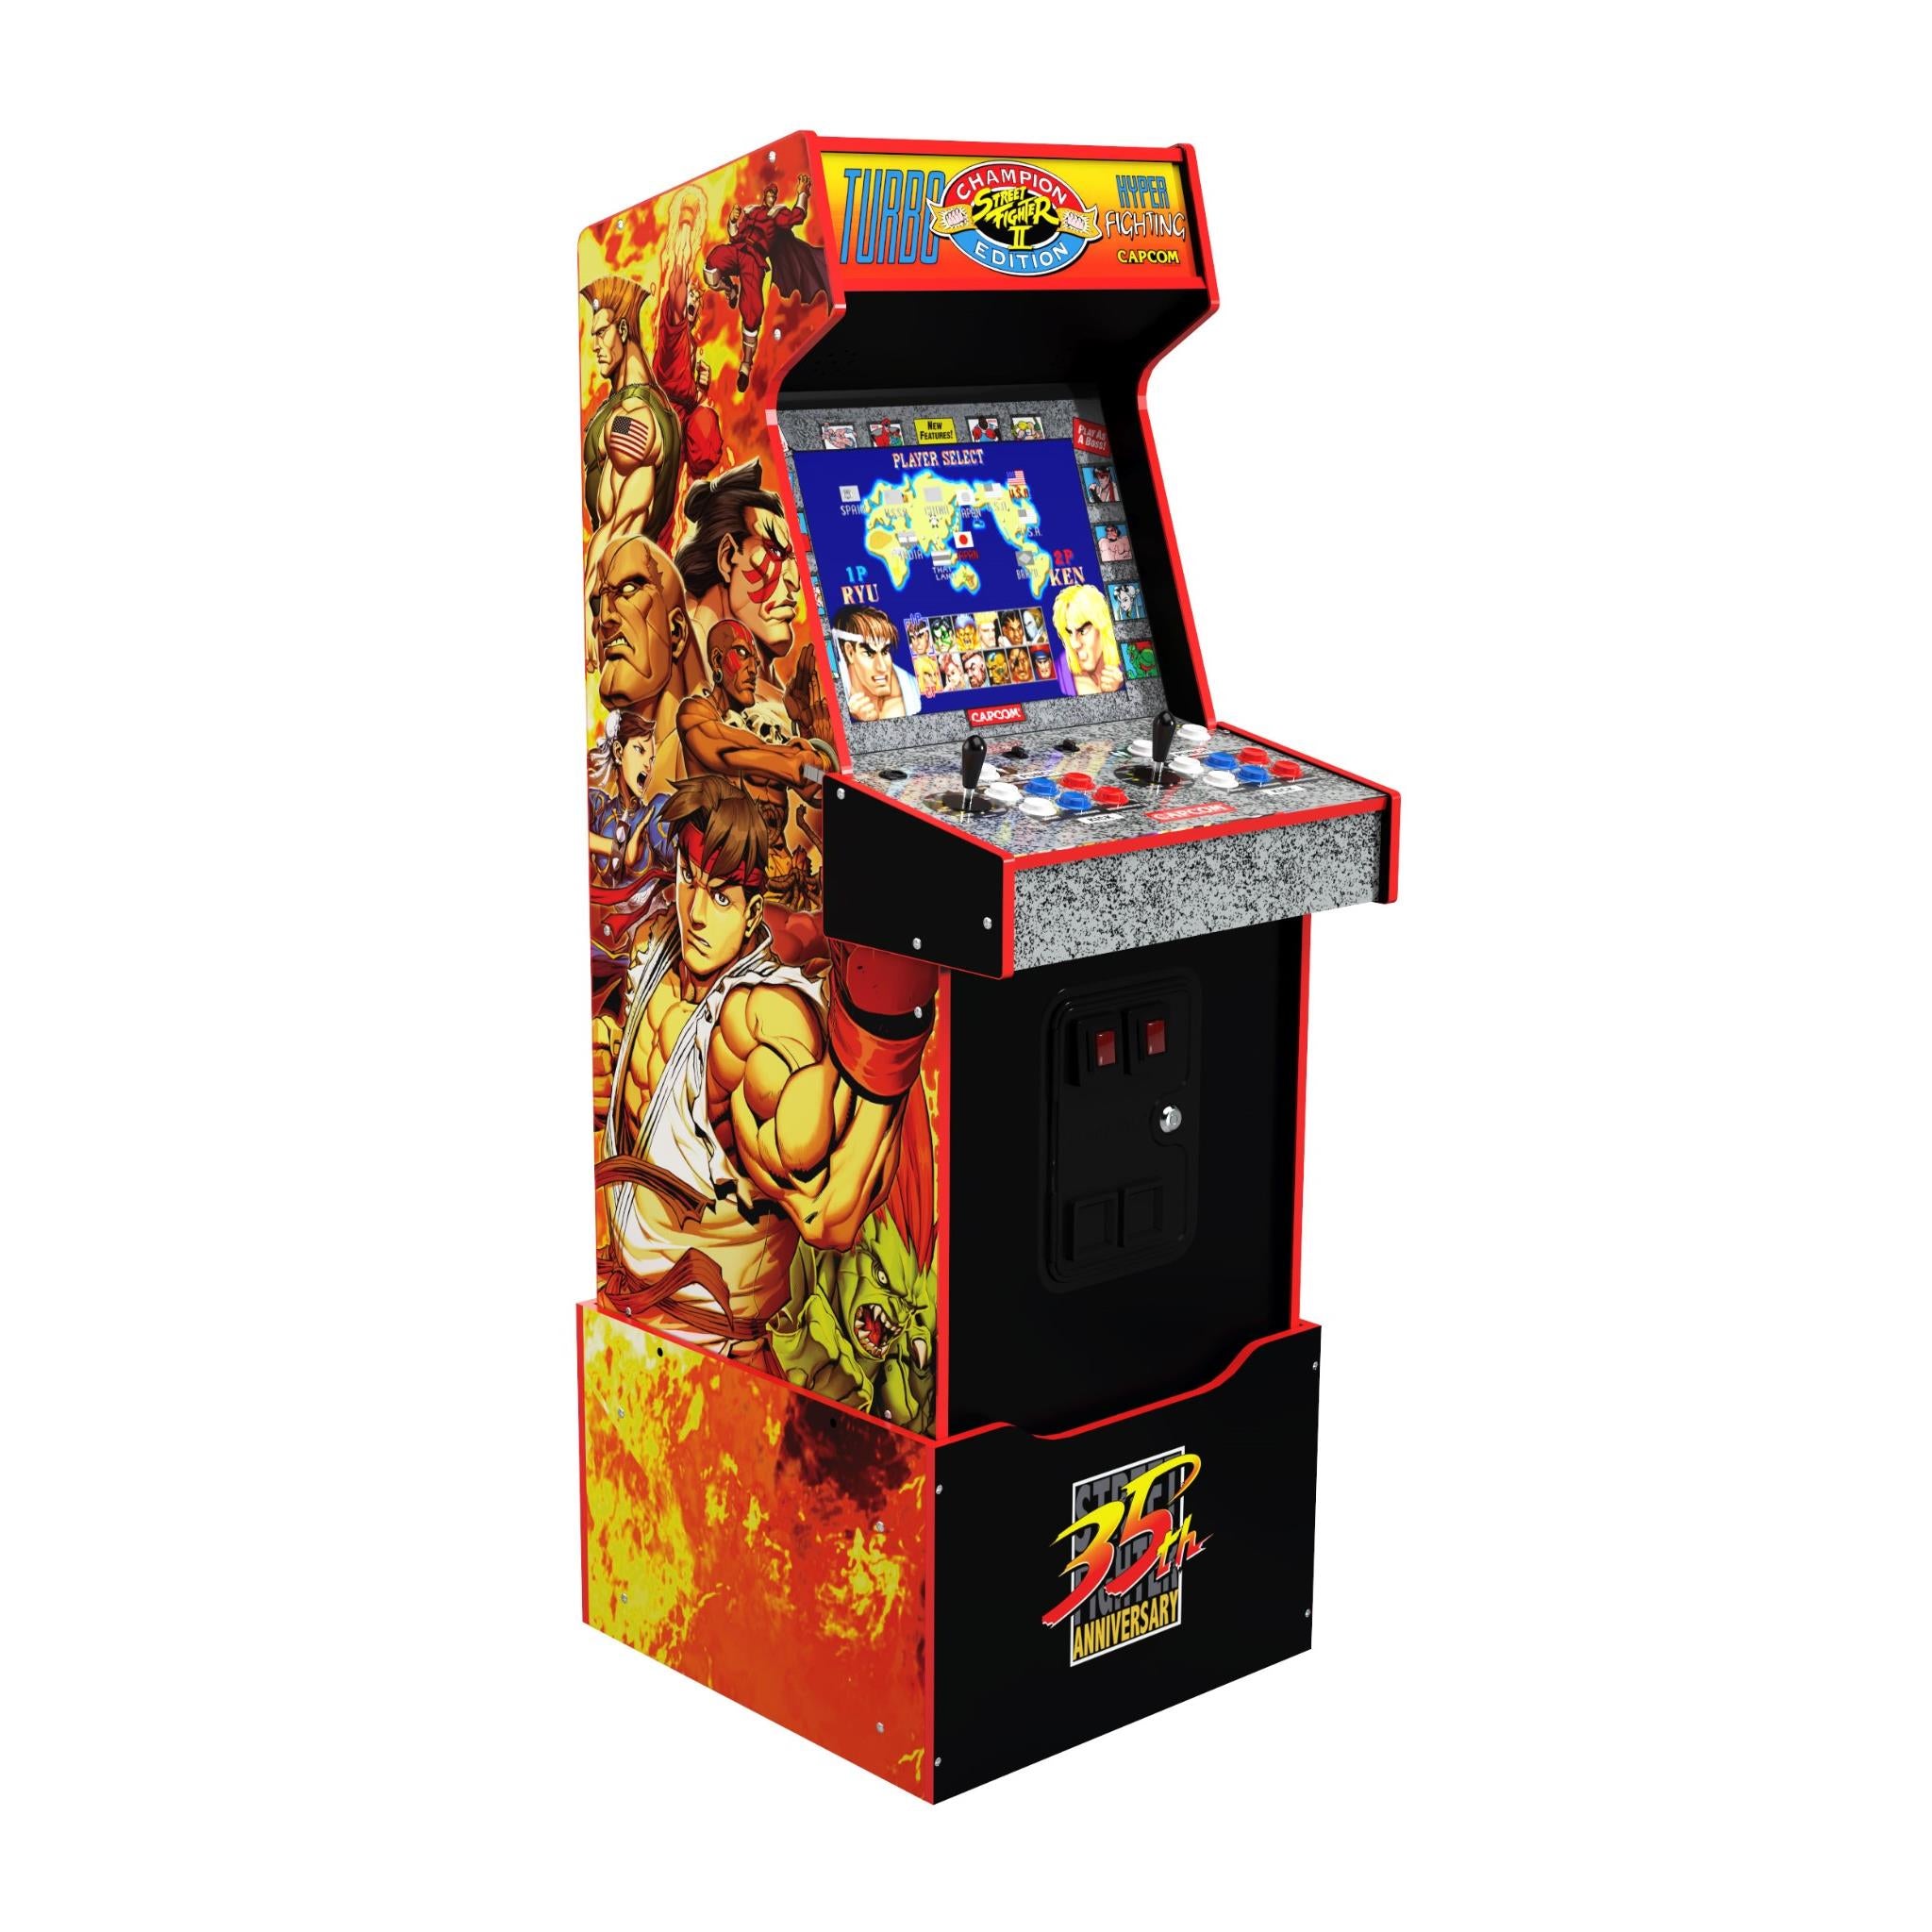 arcade1up street fighte arcade cabinet yoga flame edition